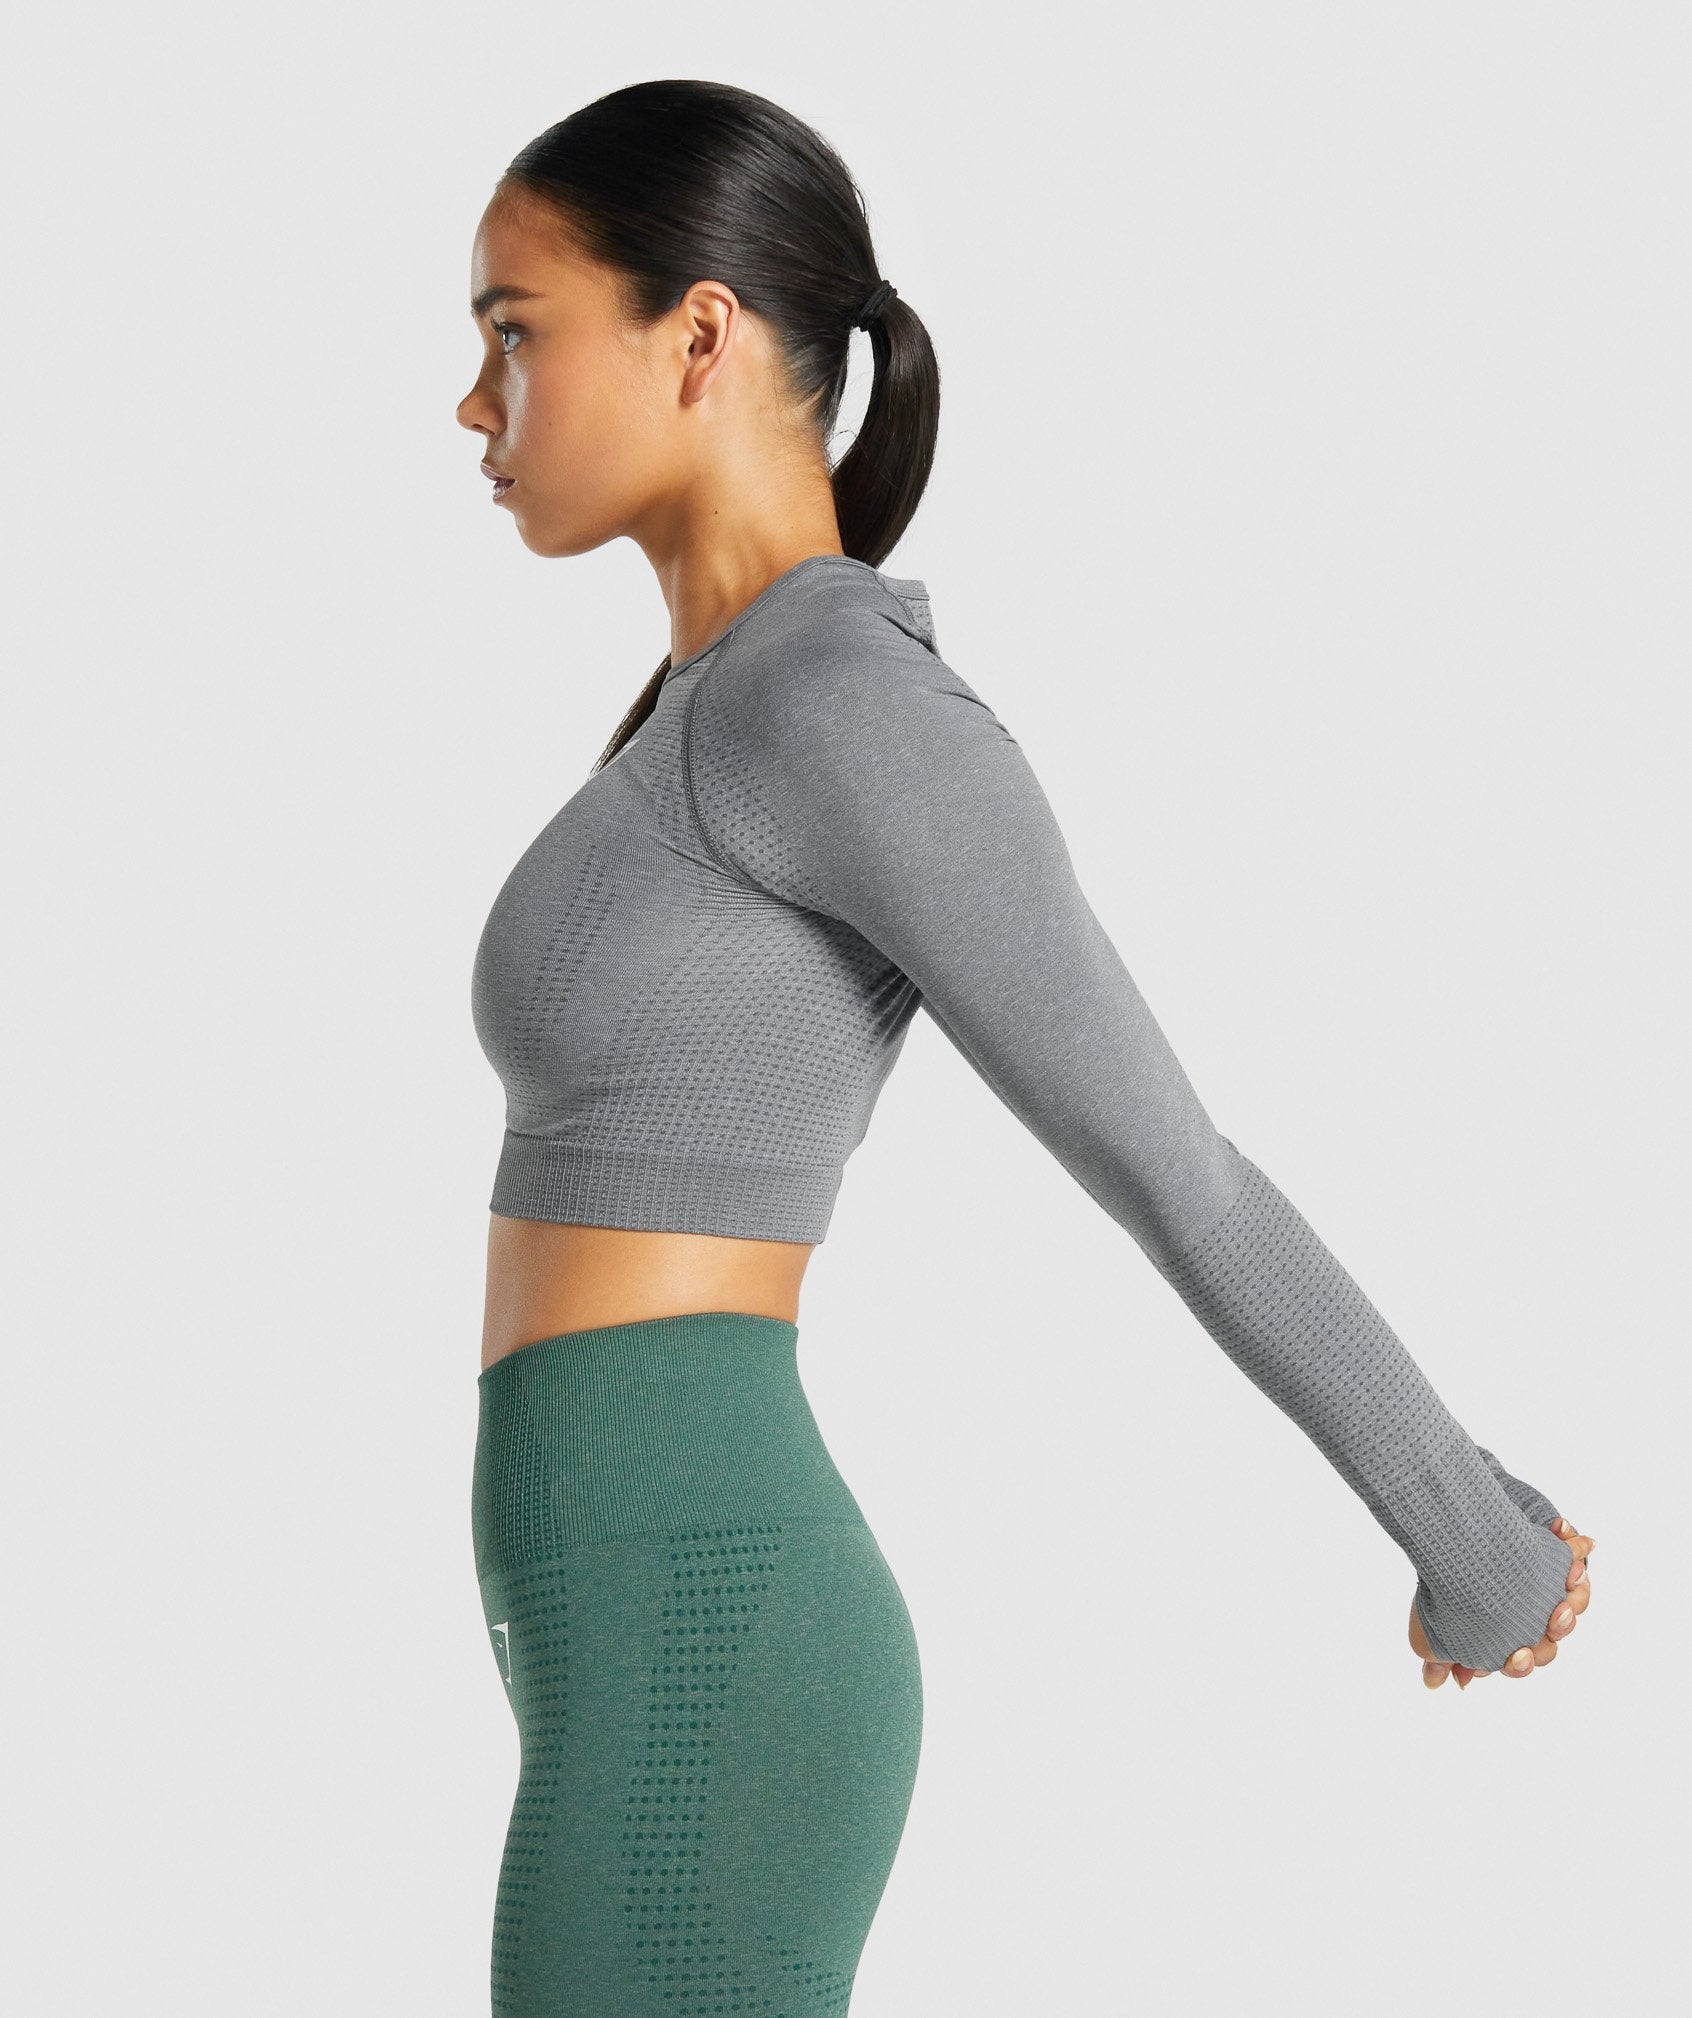 NEW GYMSHARK SEAMLESS LONG SLEEVE CROP TOP! TRY-ON 